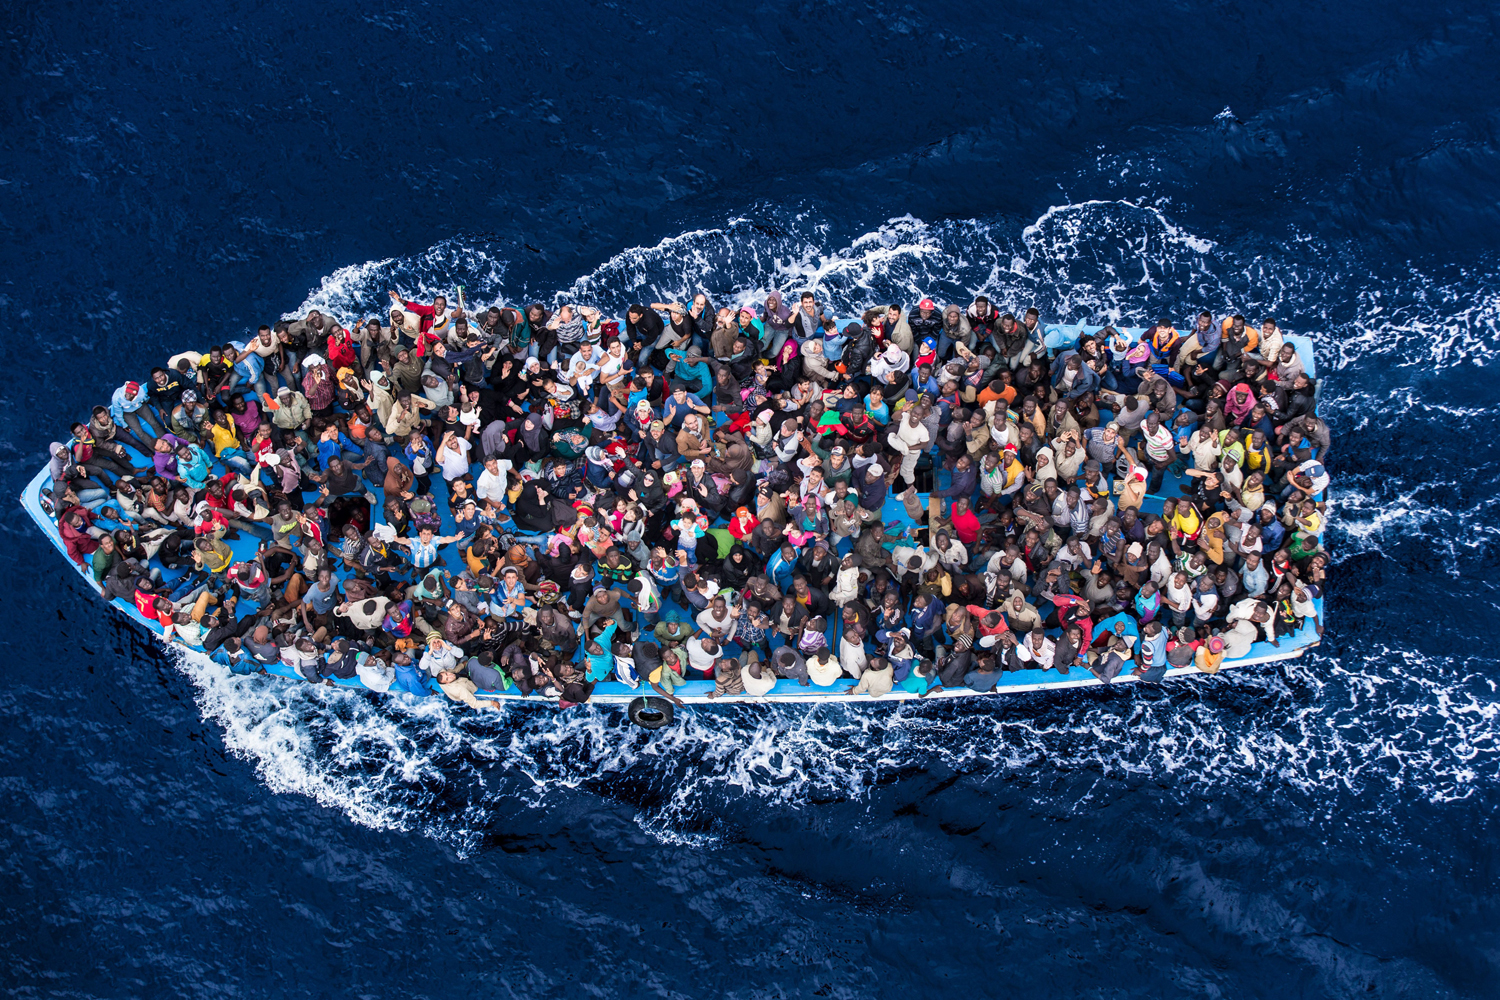 Italian navy rescues asylum seekers traveling by boat off the coast of Africa in the Mediterranean Sea, June 7, 2014.